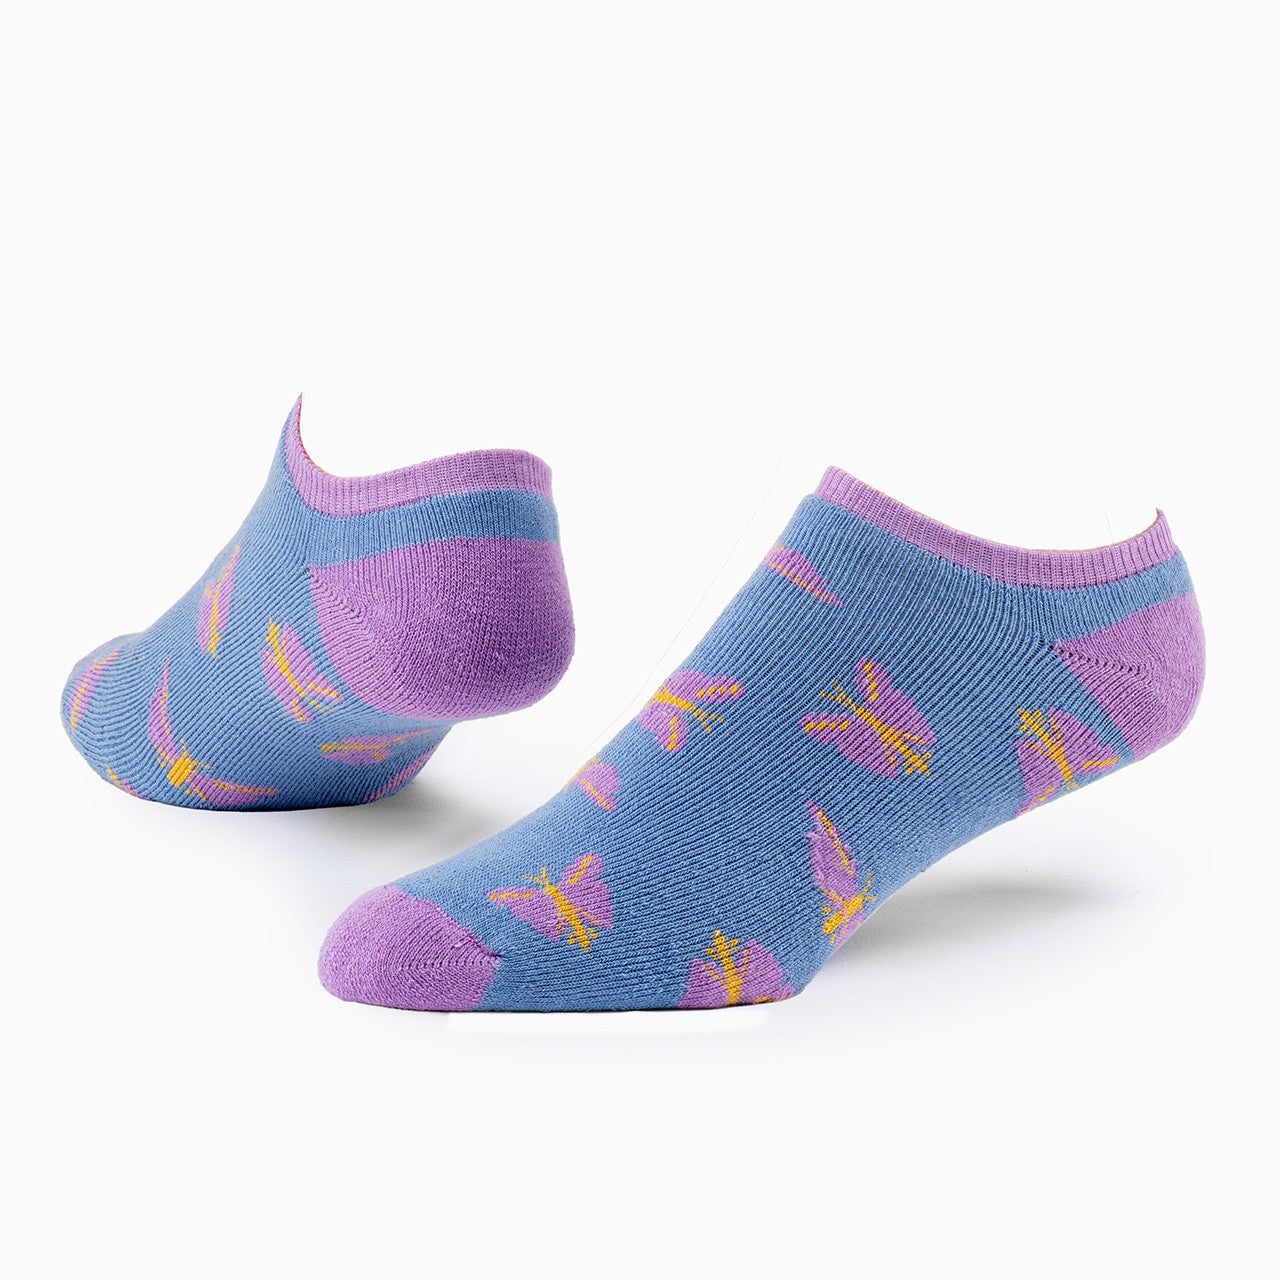 Patterned Footie | 81.6% Organic Cotton | Ankle